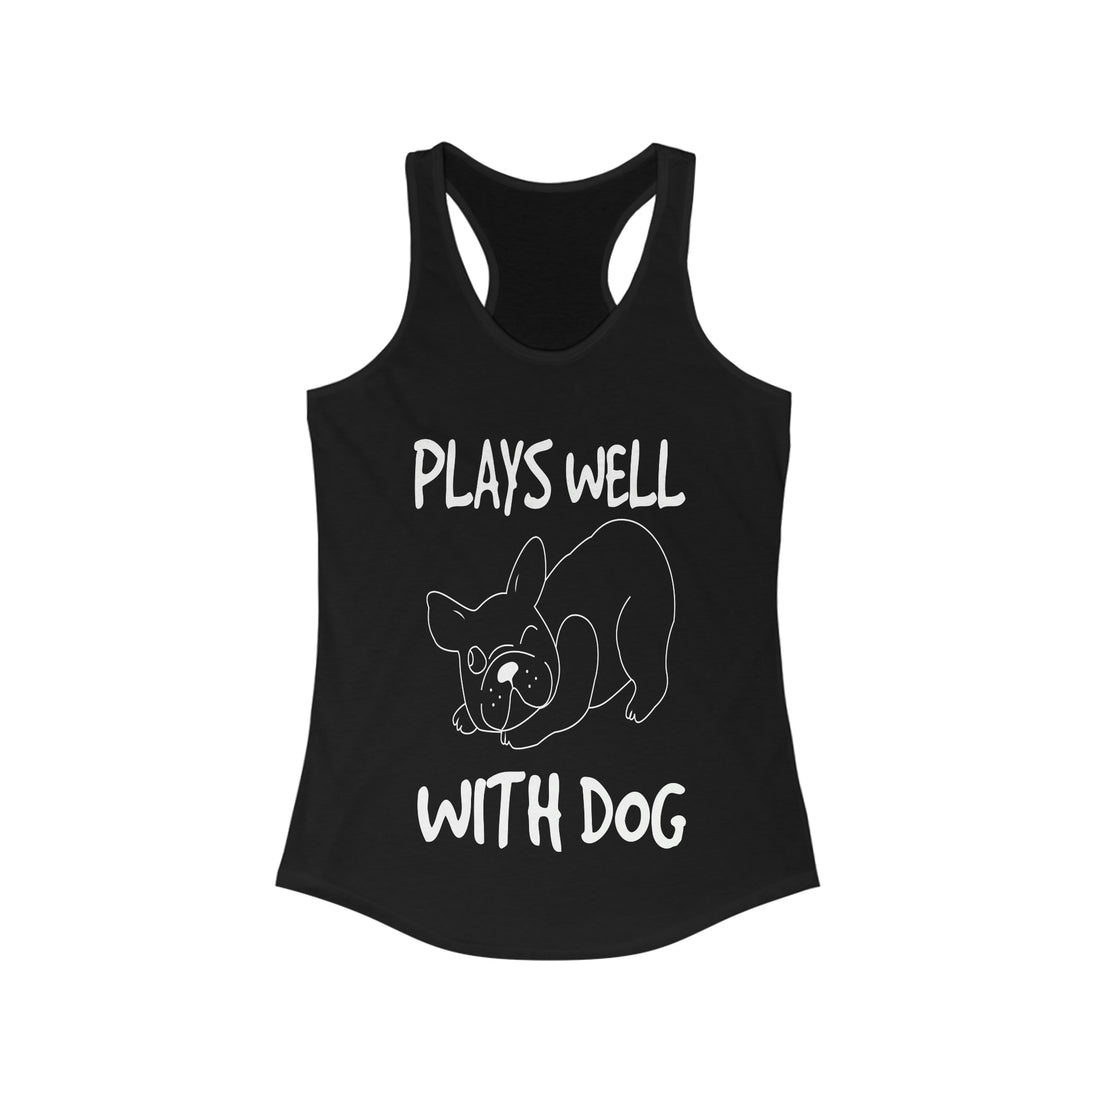 Plays Well With Dog - Racerback Tank Top